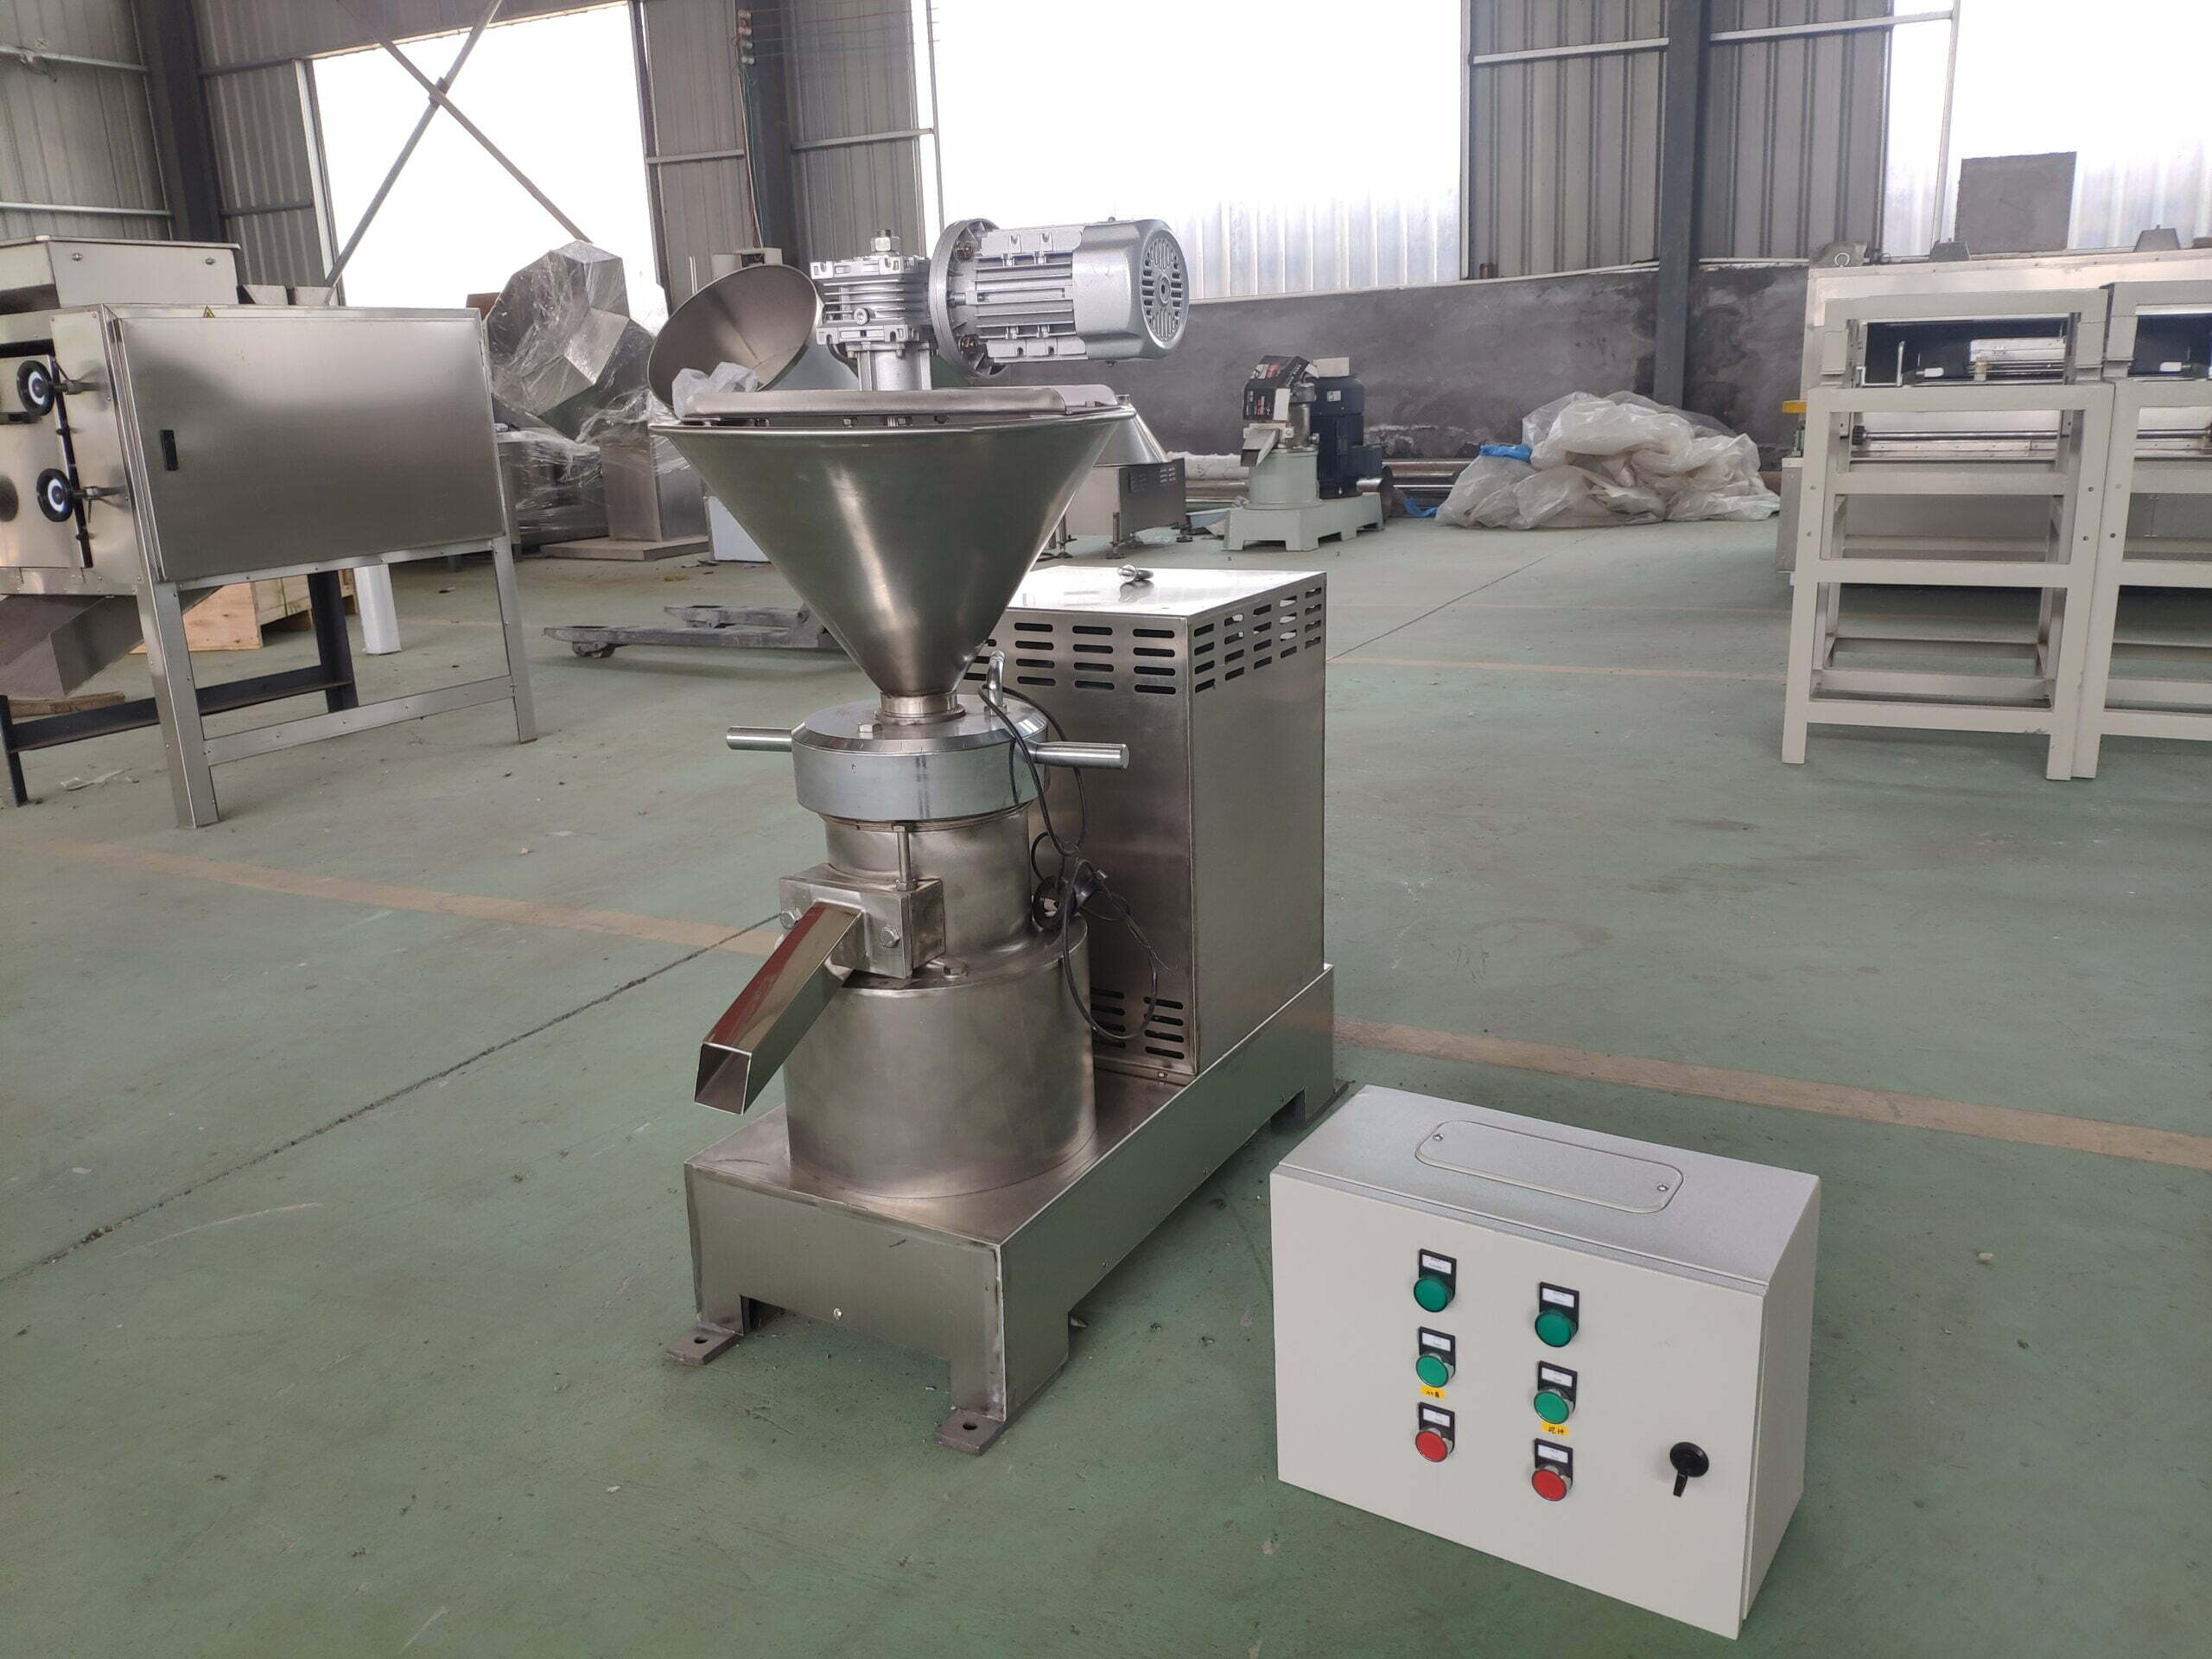 Peanut butter grinding machine scaled